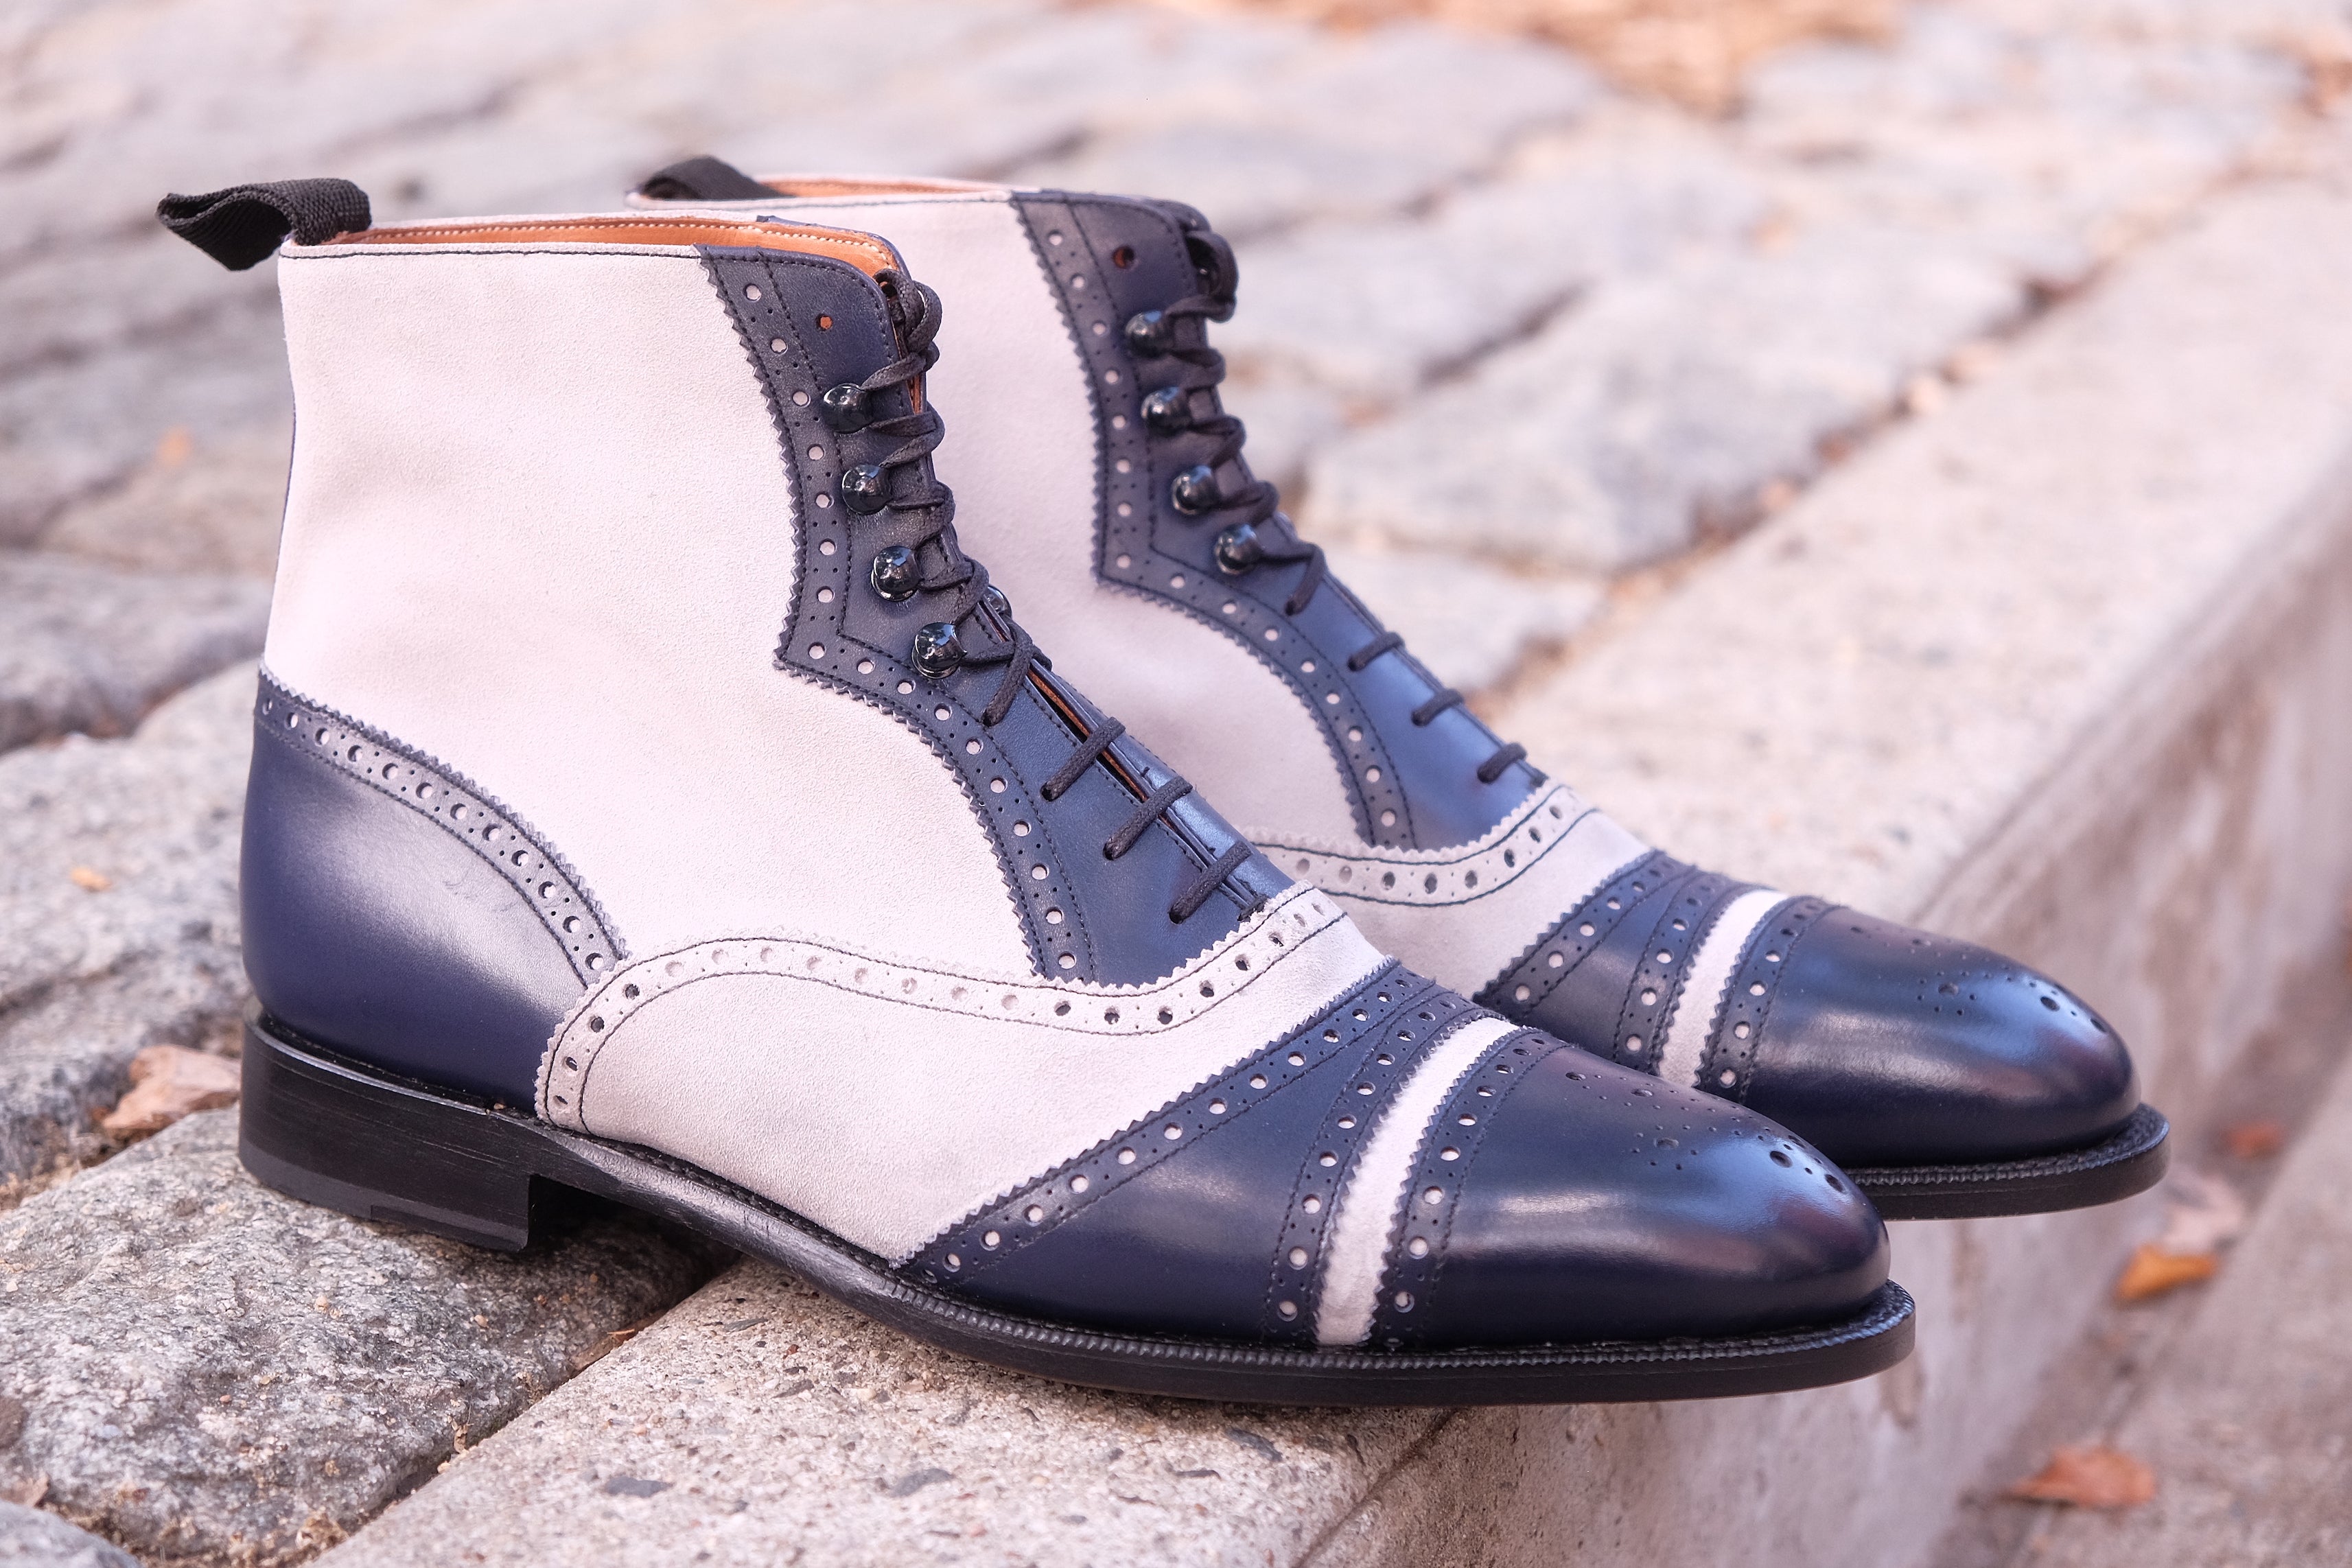 Whitman - MTO - Marine Blue Calf / Pearl Suede - NGT last - Single Leather Sole